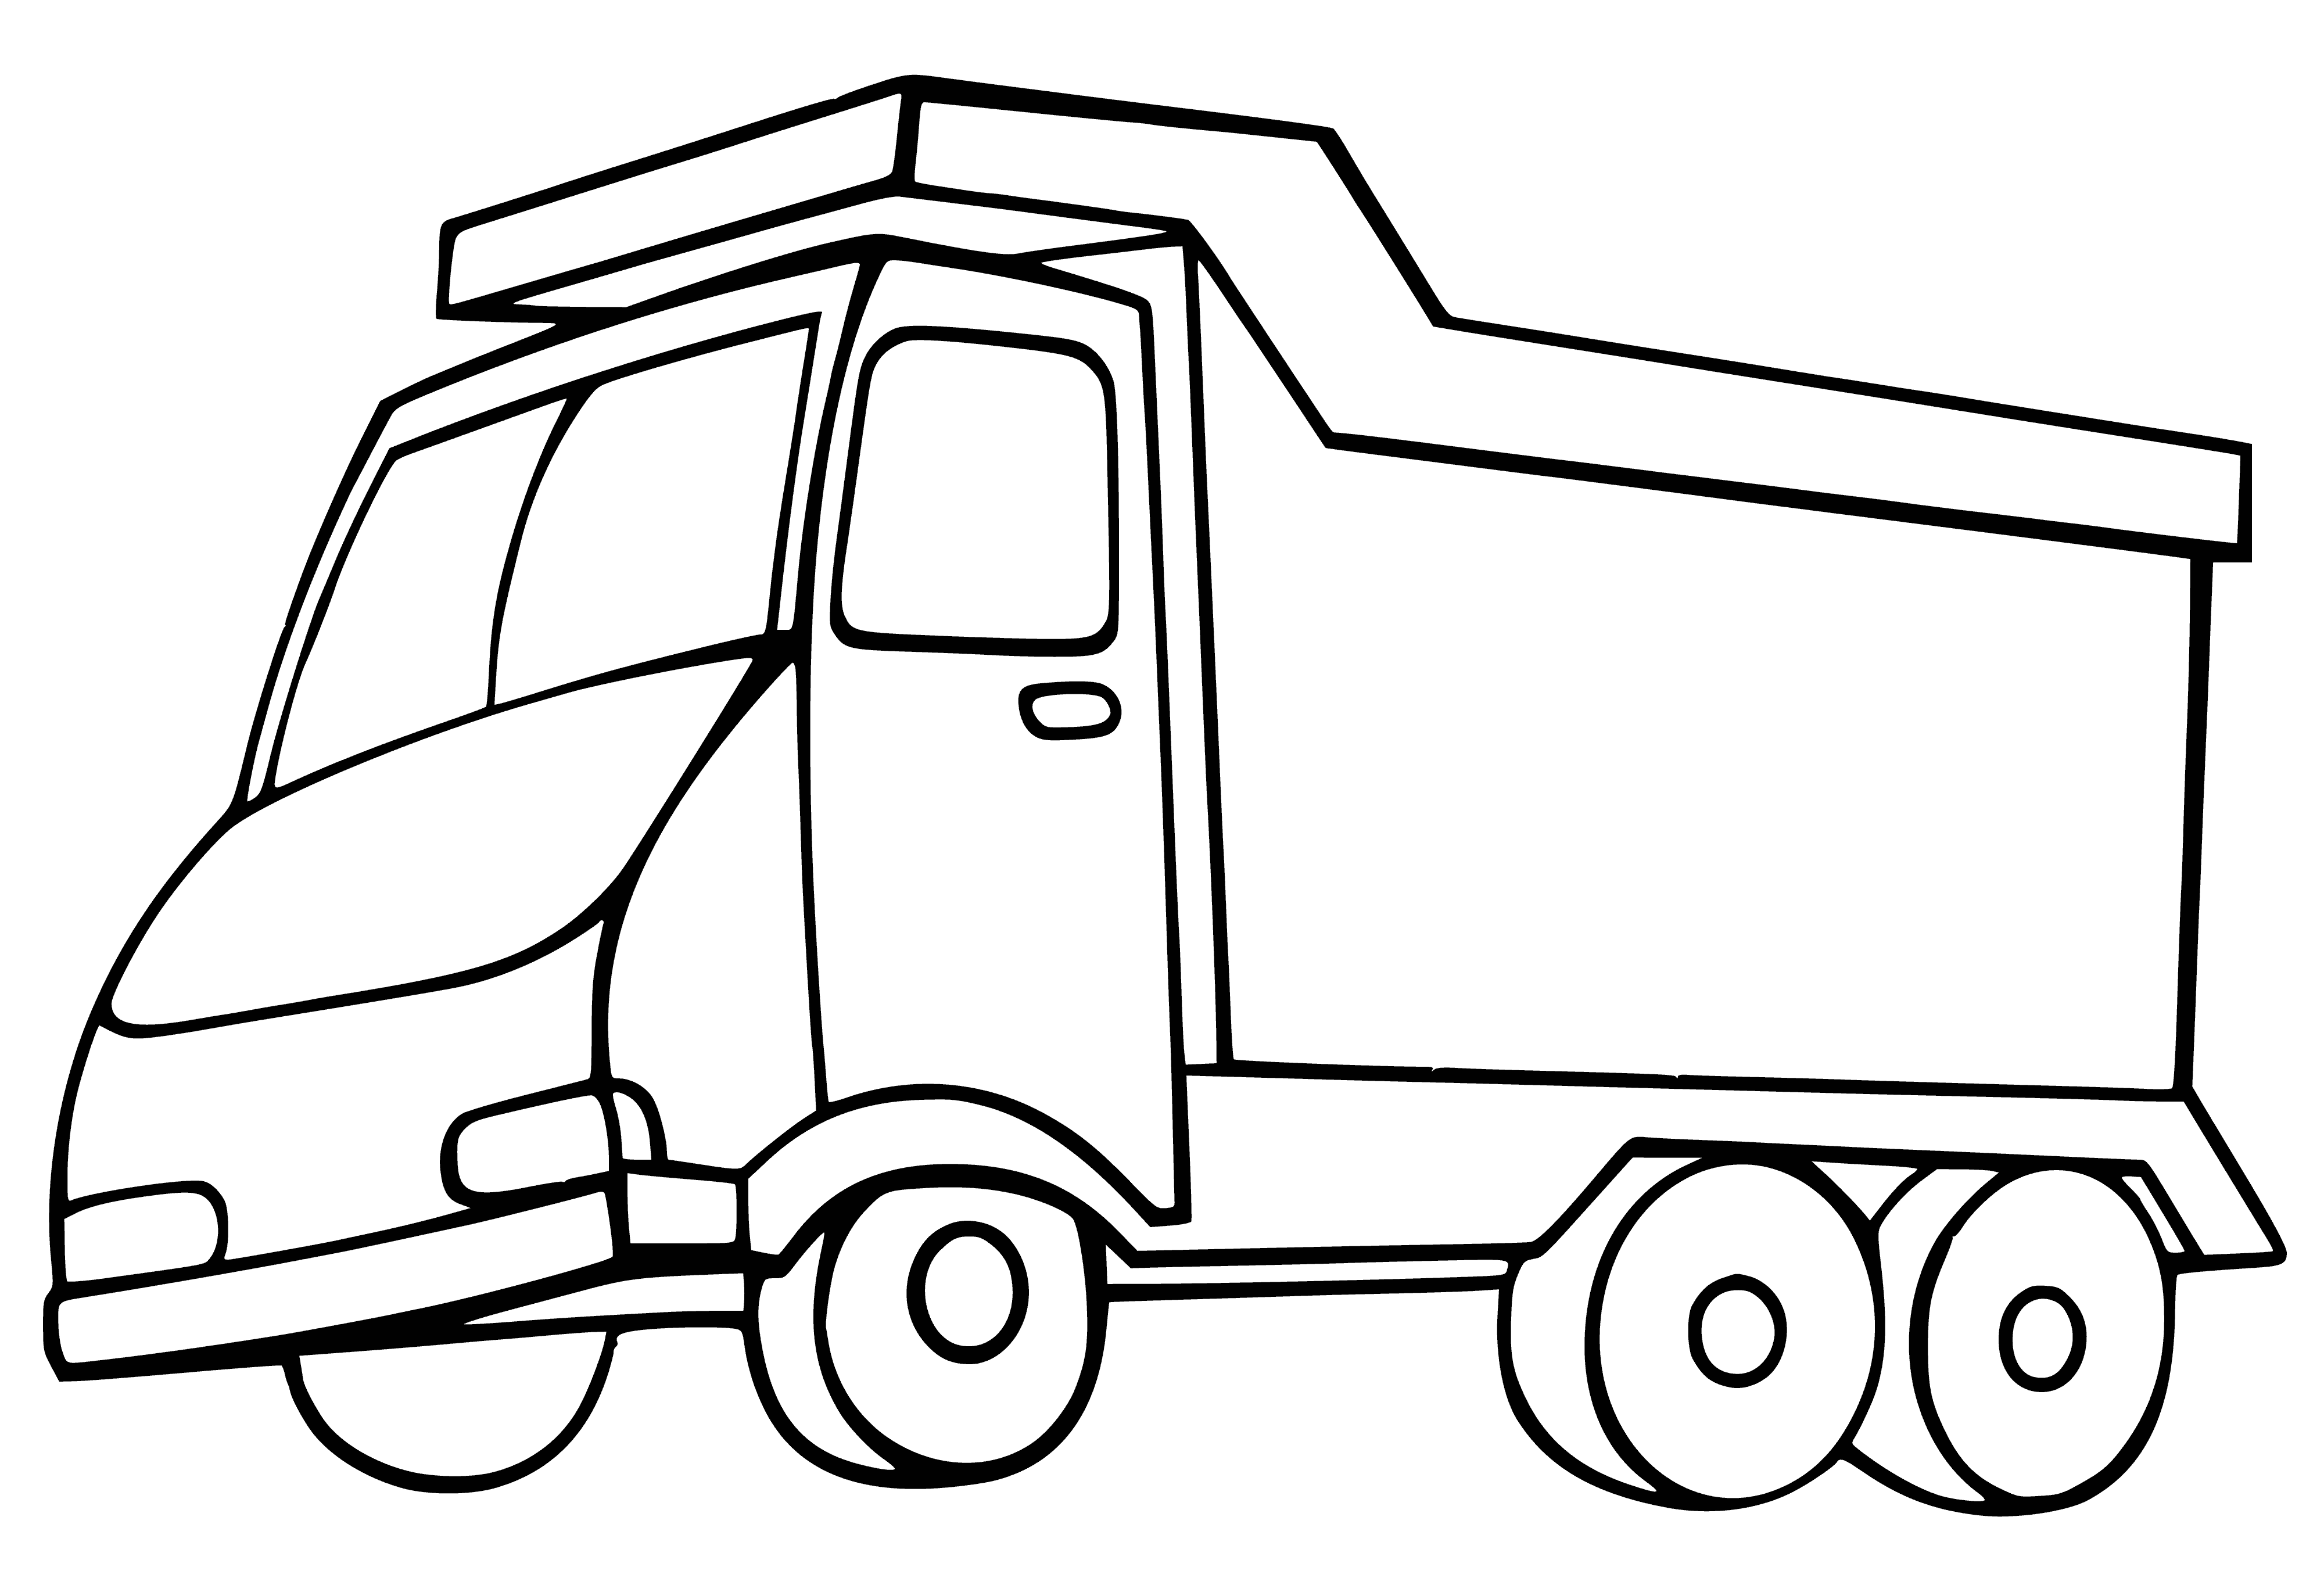 Dump truck toy coloring page